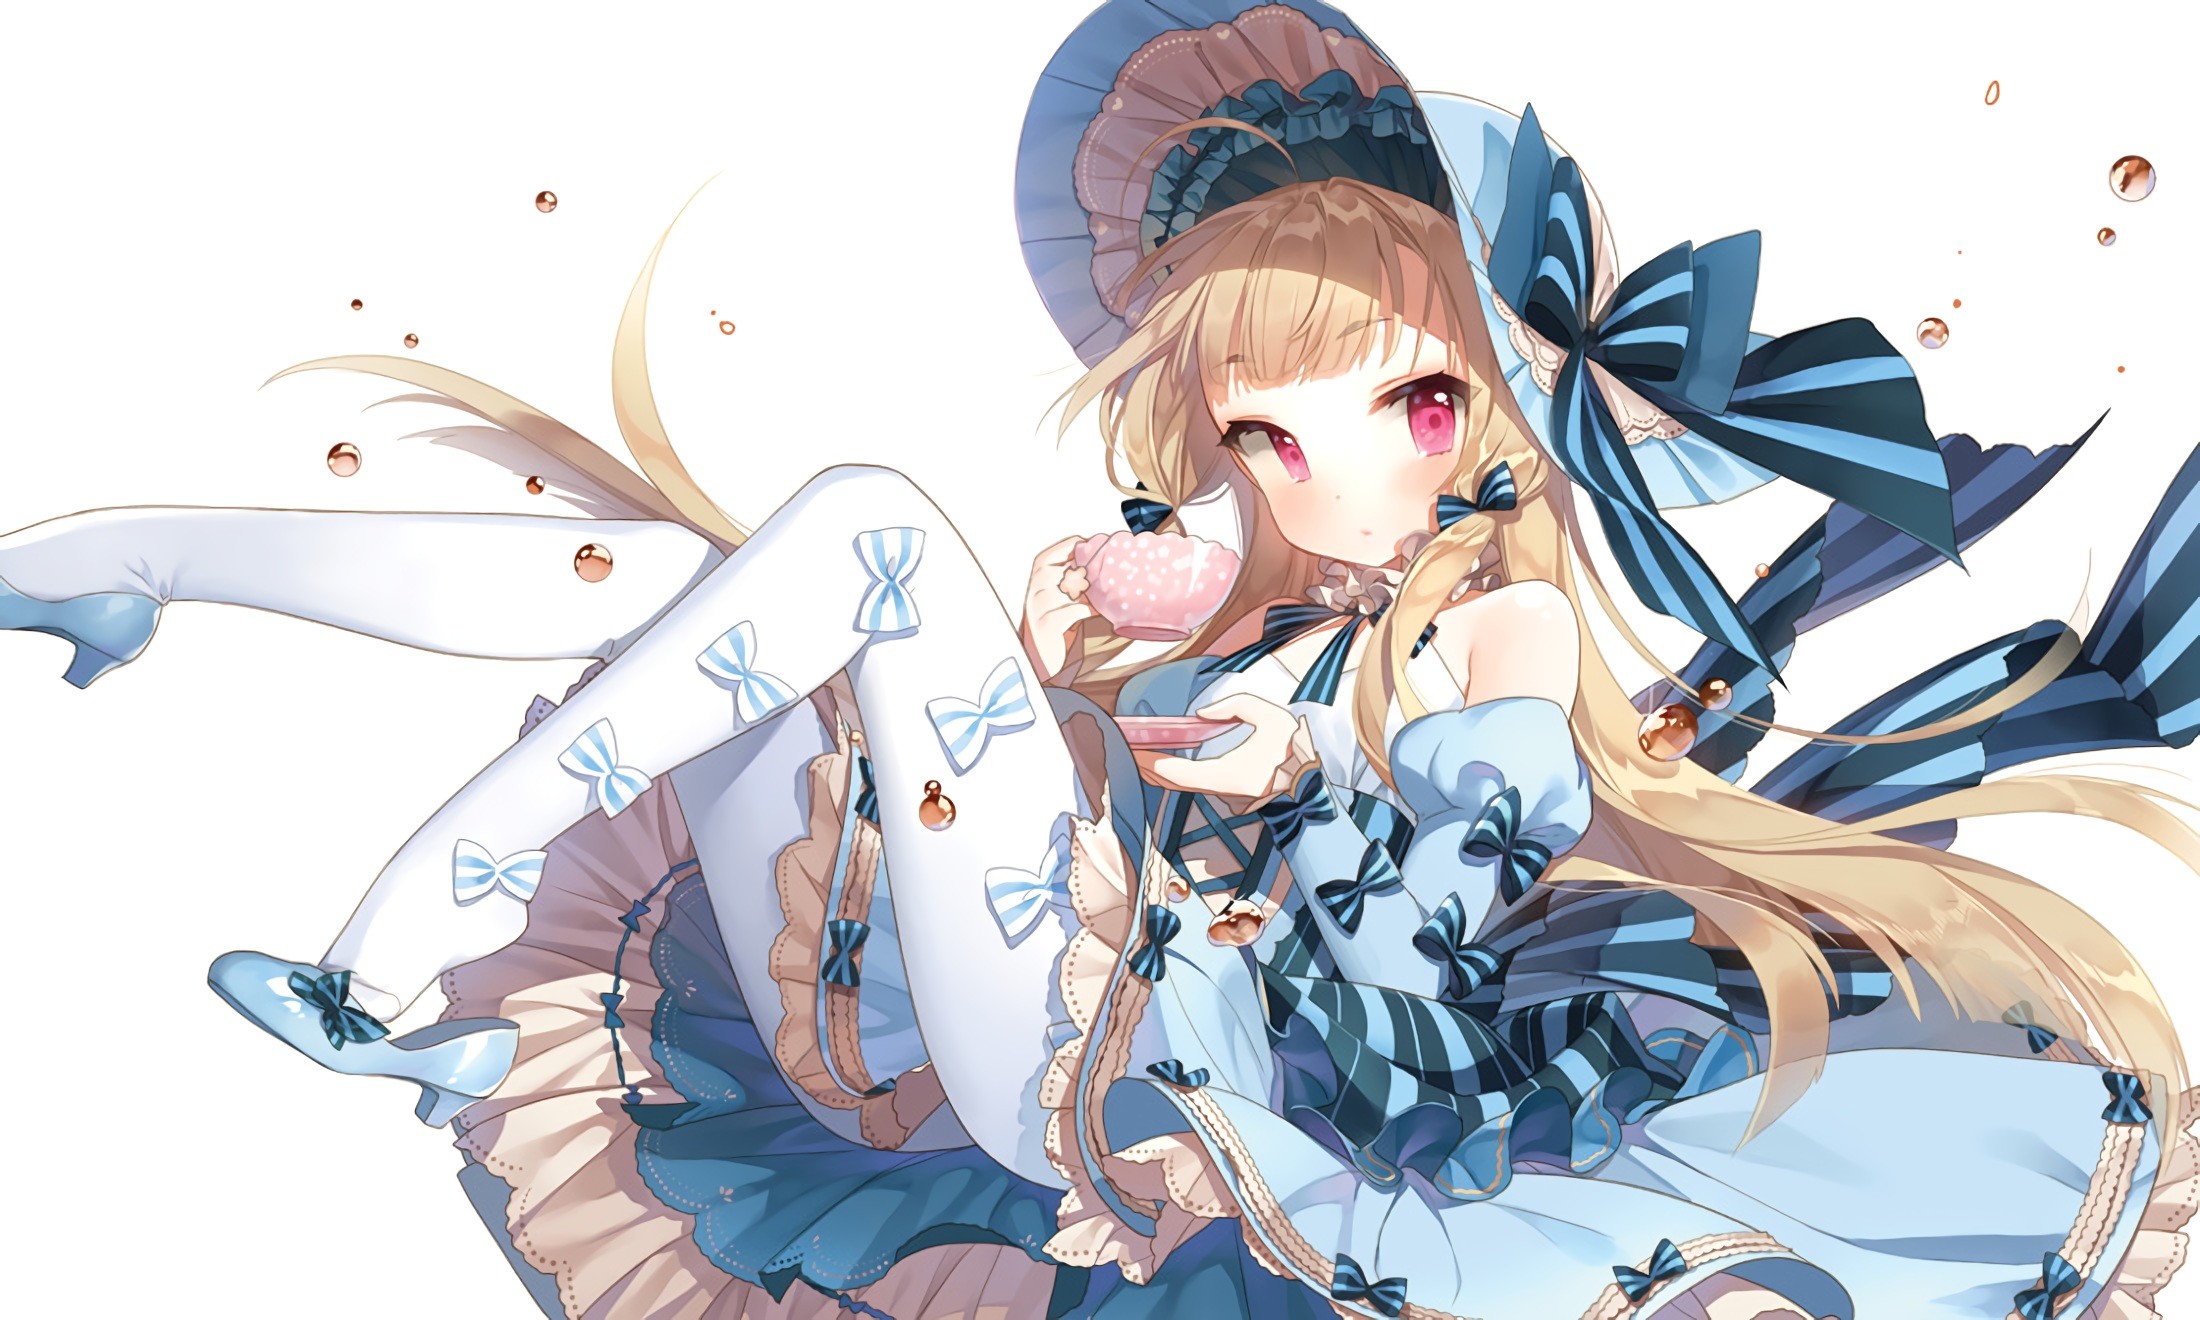 Anime 2200x1320 anime anime girls dress drink hat headdress lolita fashion stockings original characters frills ribbon blonde Pixiv women with hats thighs legs looking at viewer cup